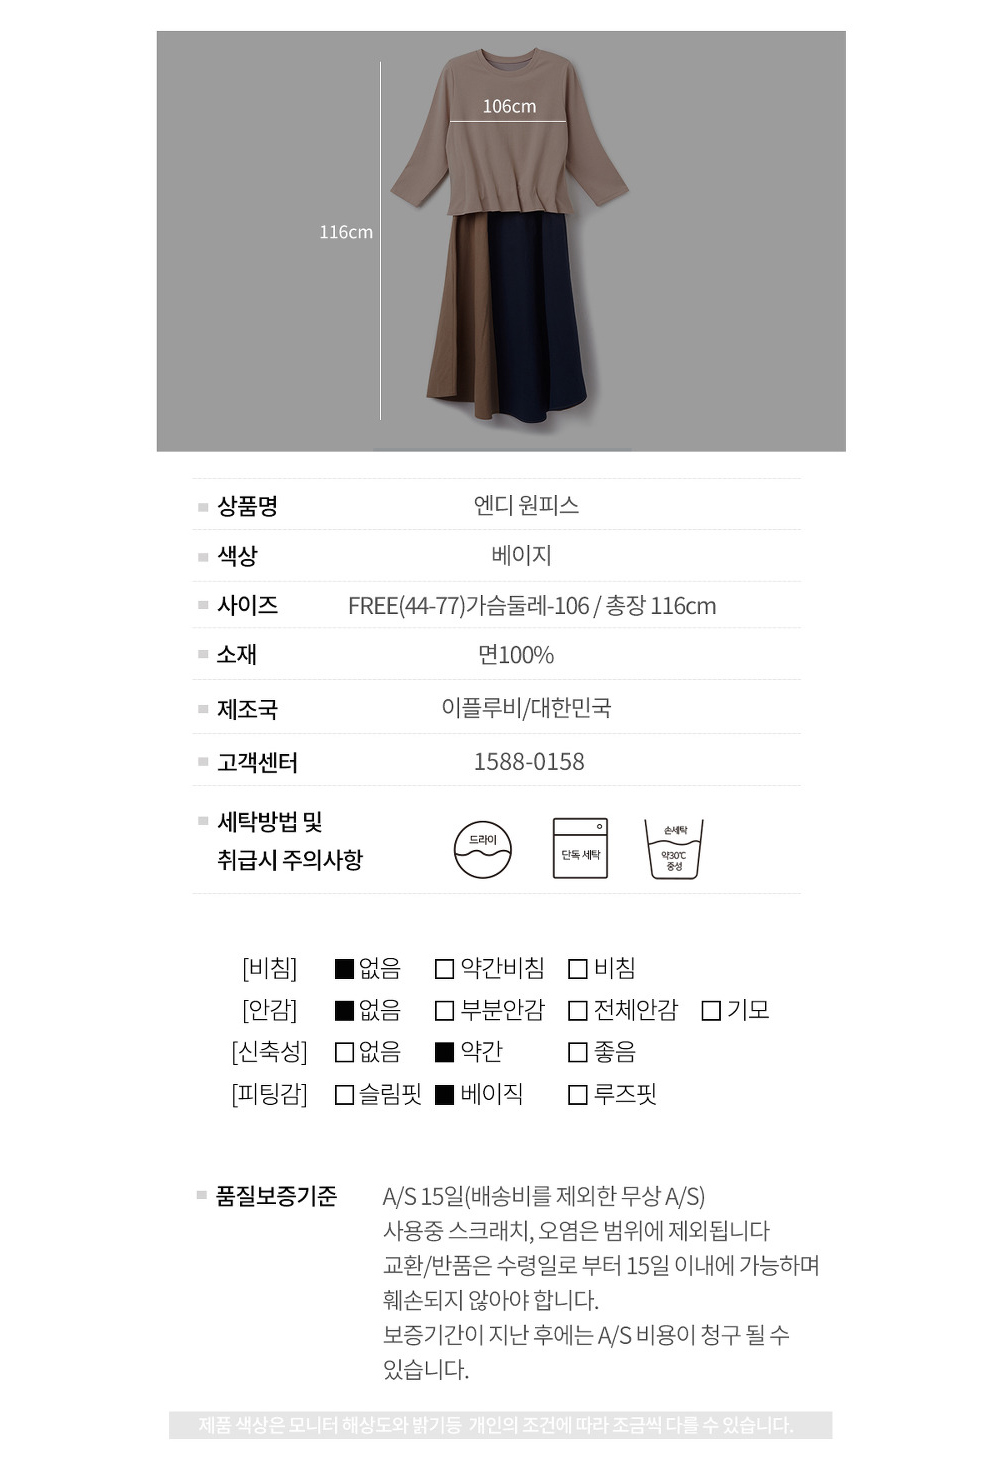 long skirt product image-S1L4